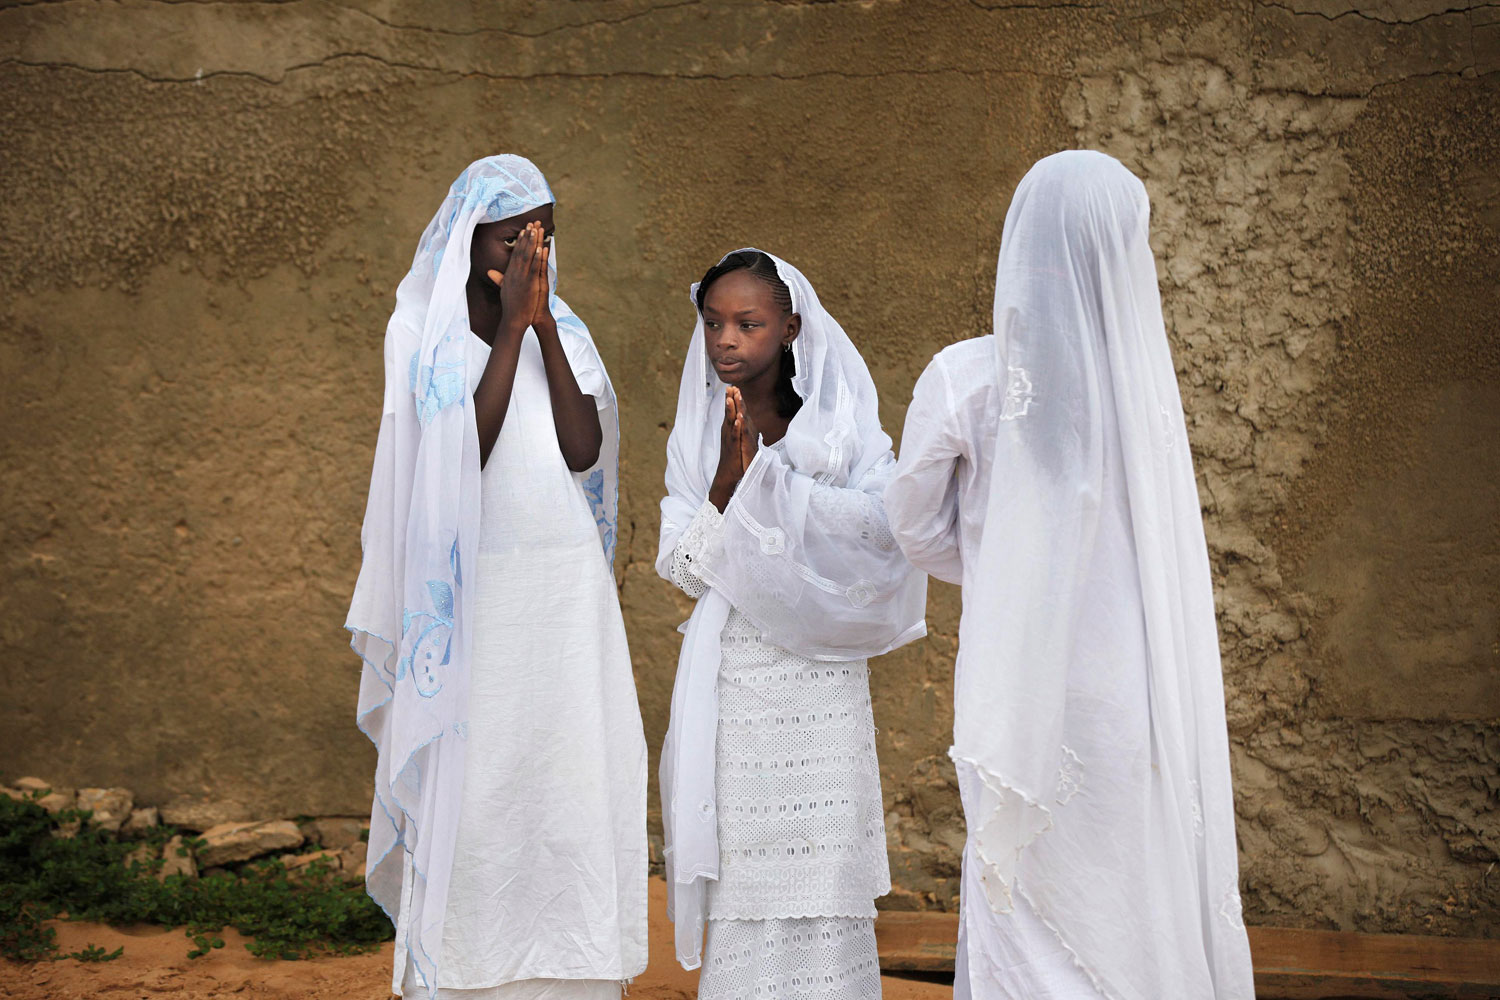 August 31, 2011. Girls pray next to a cemetery after Eid al-Fitr prayers marking the end of the Muslim holy month of Ramadan in Dakar, Senegal.